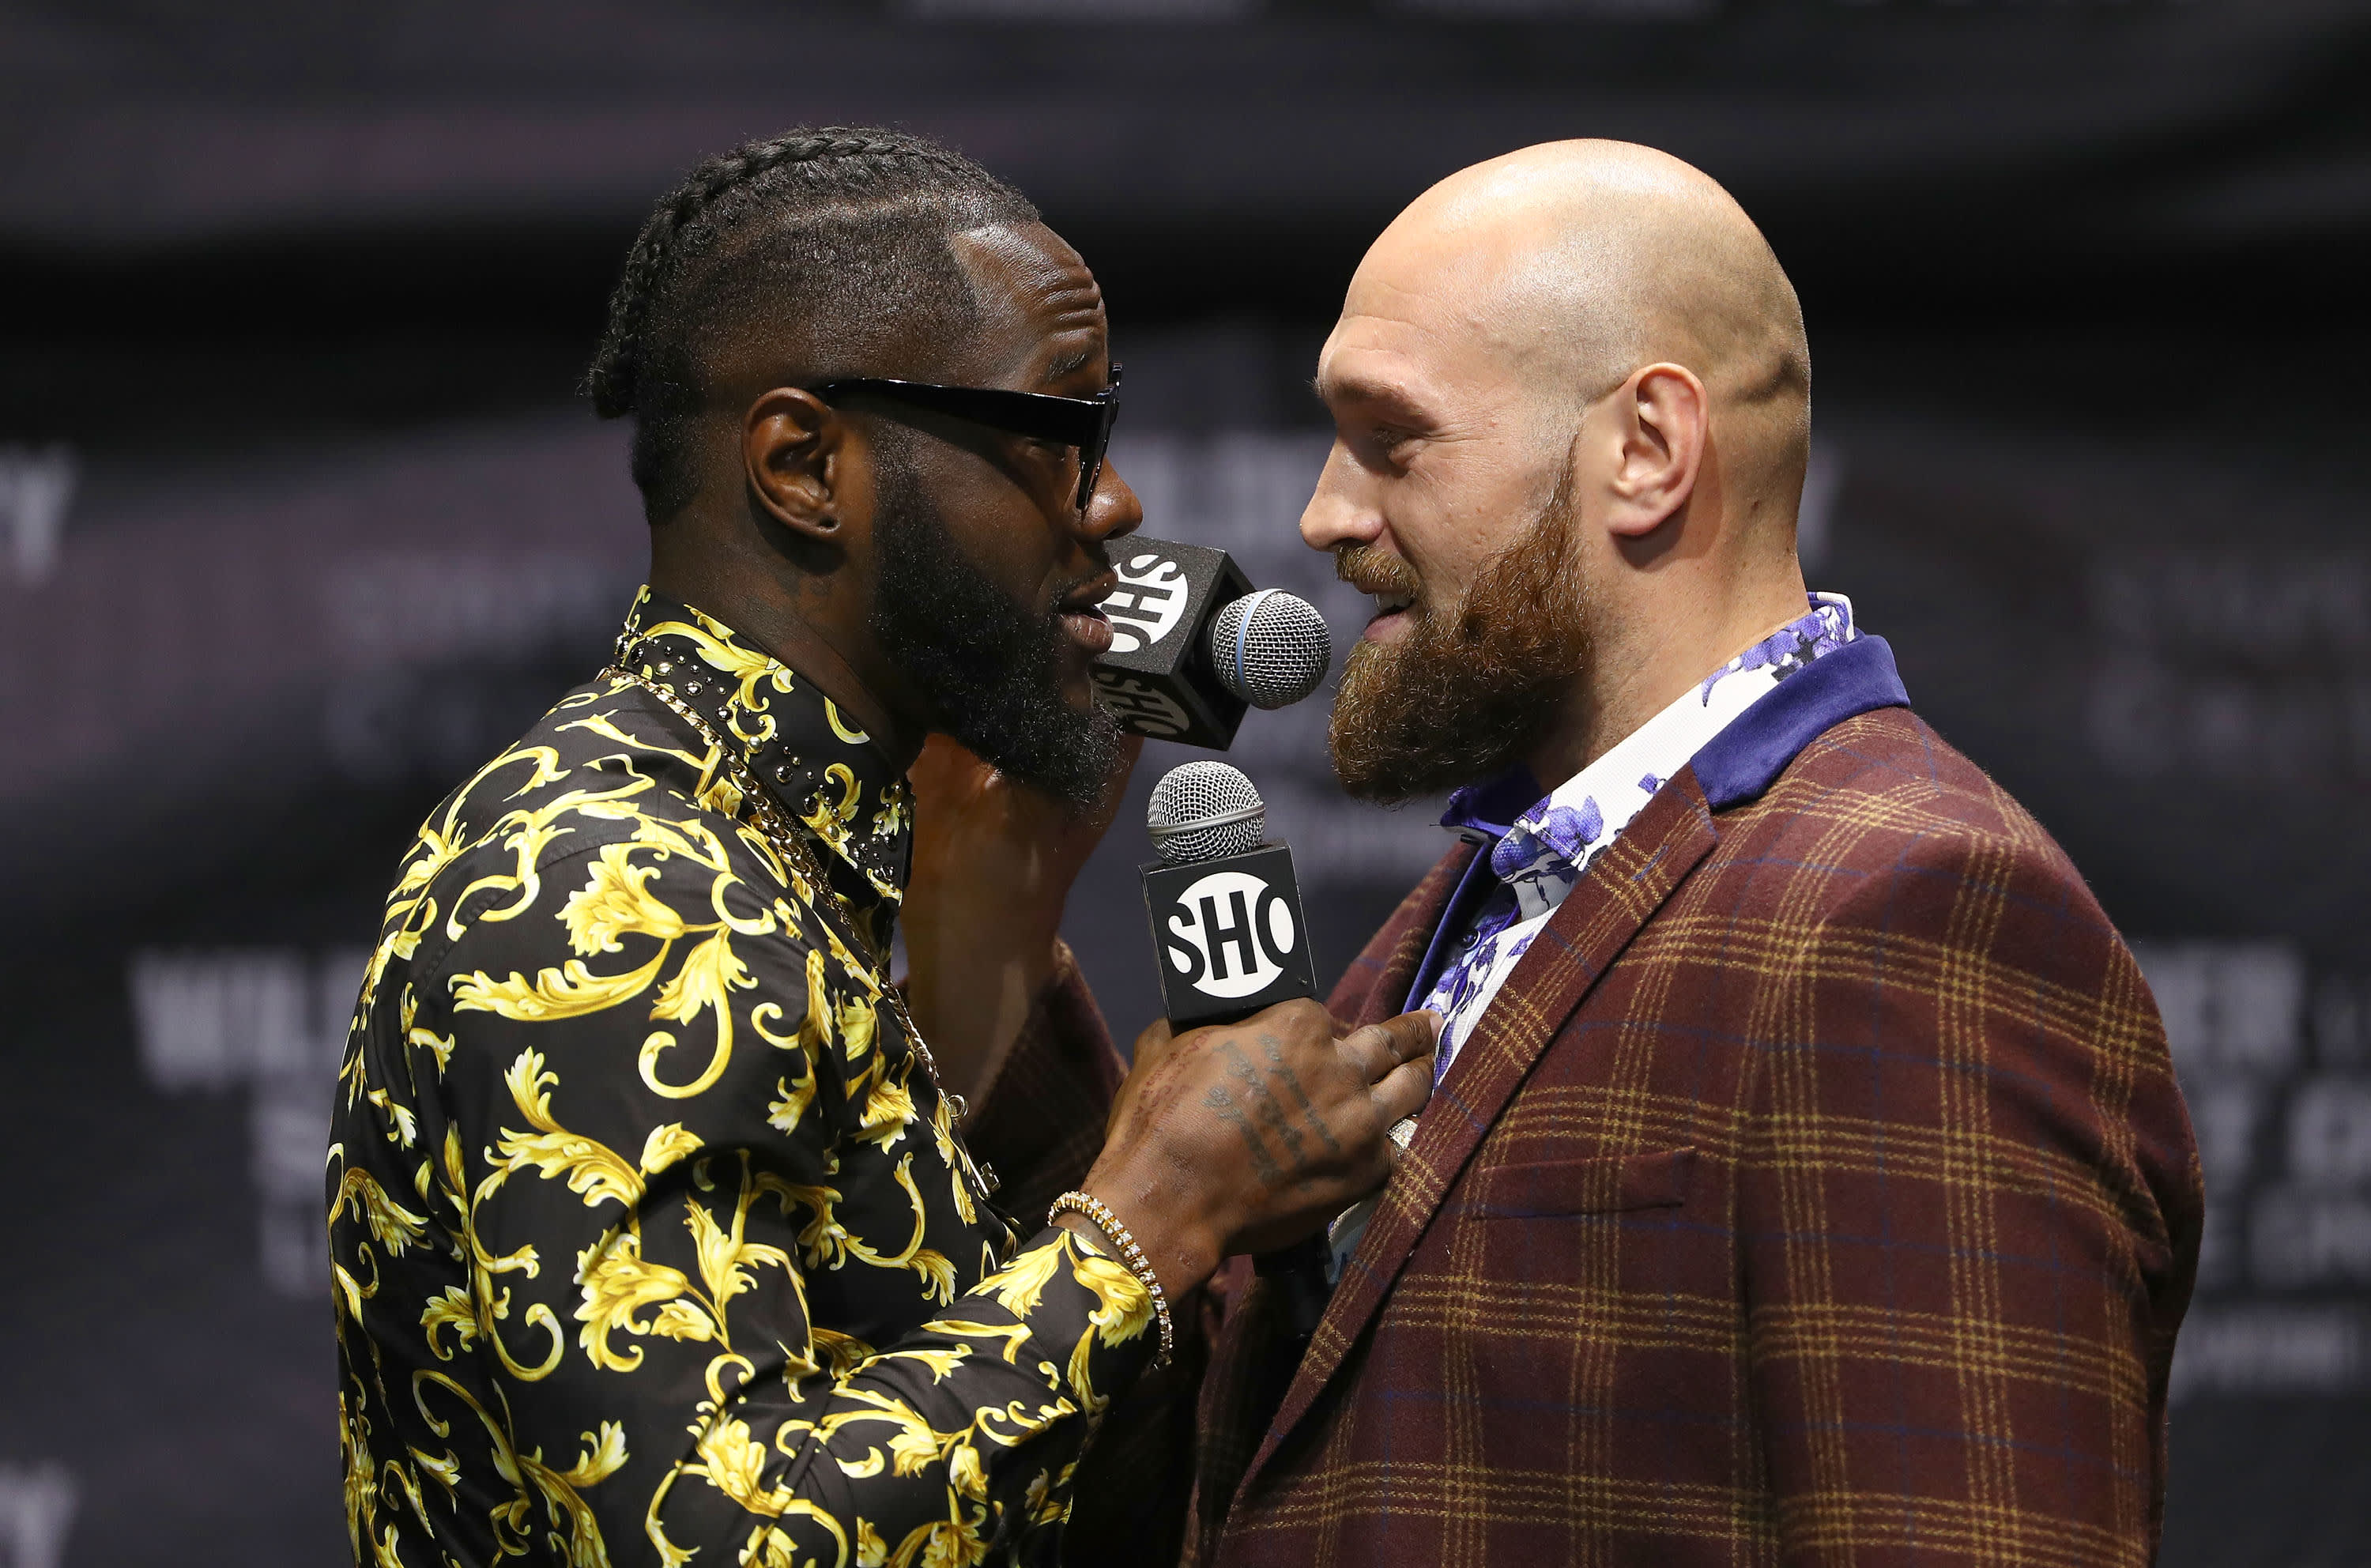 Exclusive: Bob Arum says Fury vs Wilder PPV buys closer to 1.2m